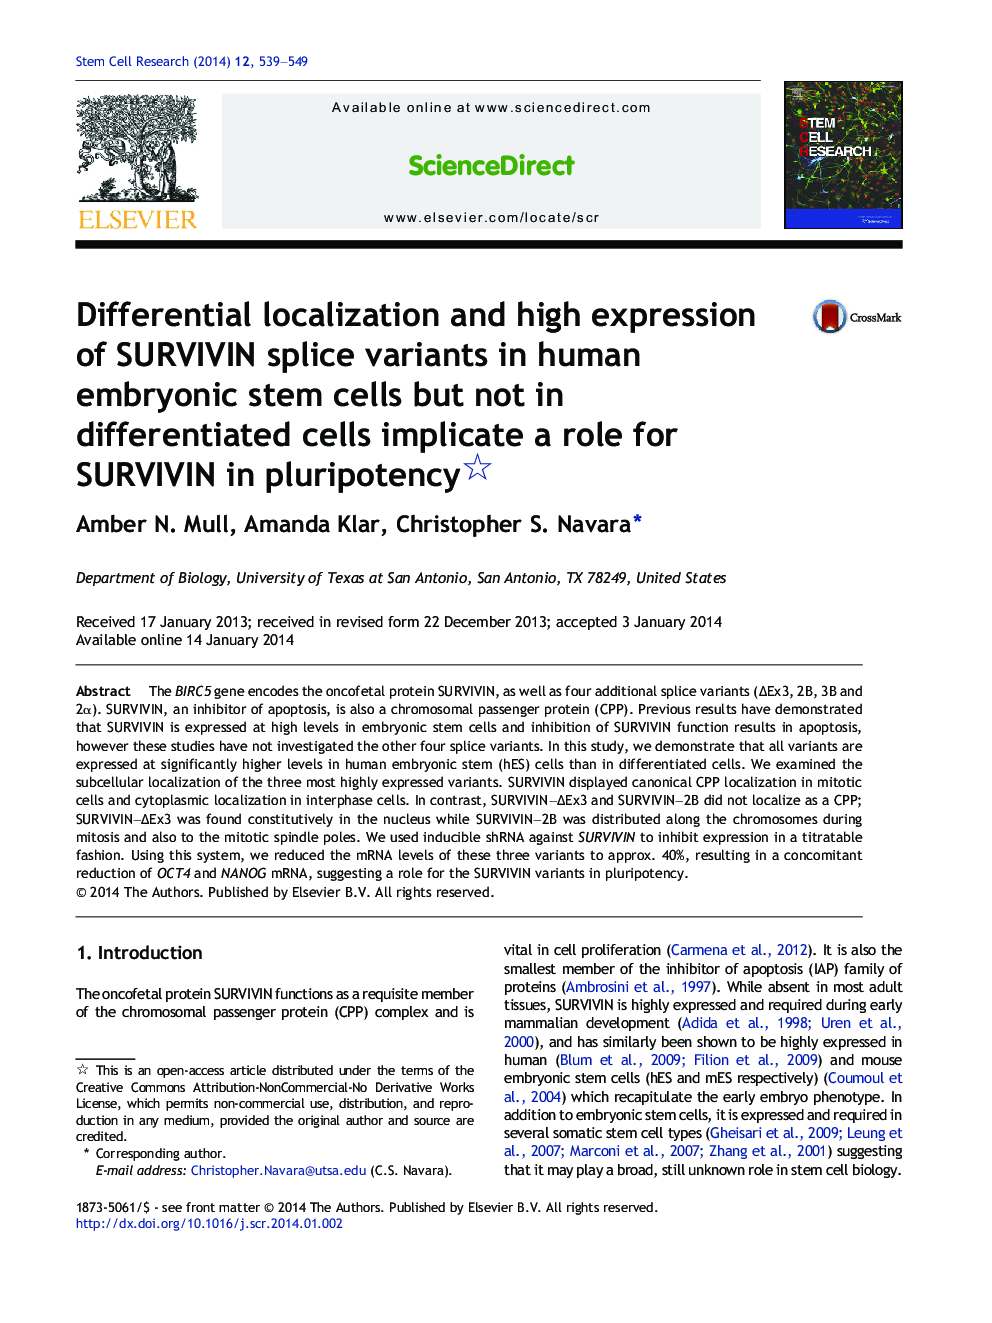 Differential localization and high expression of SURVIVIN splice variants in human embryonic stem cells but not in differentiated cells implicate a role for SURVIVIN in pluripotency 